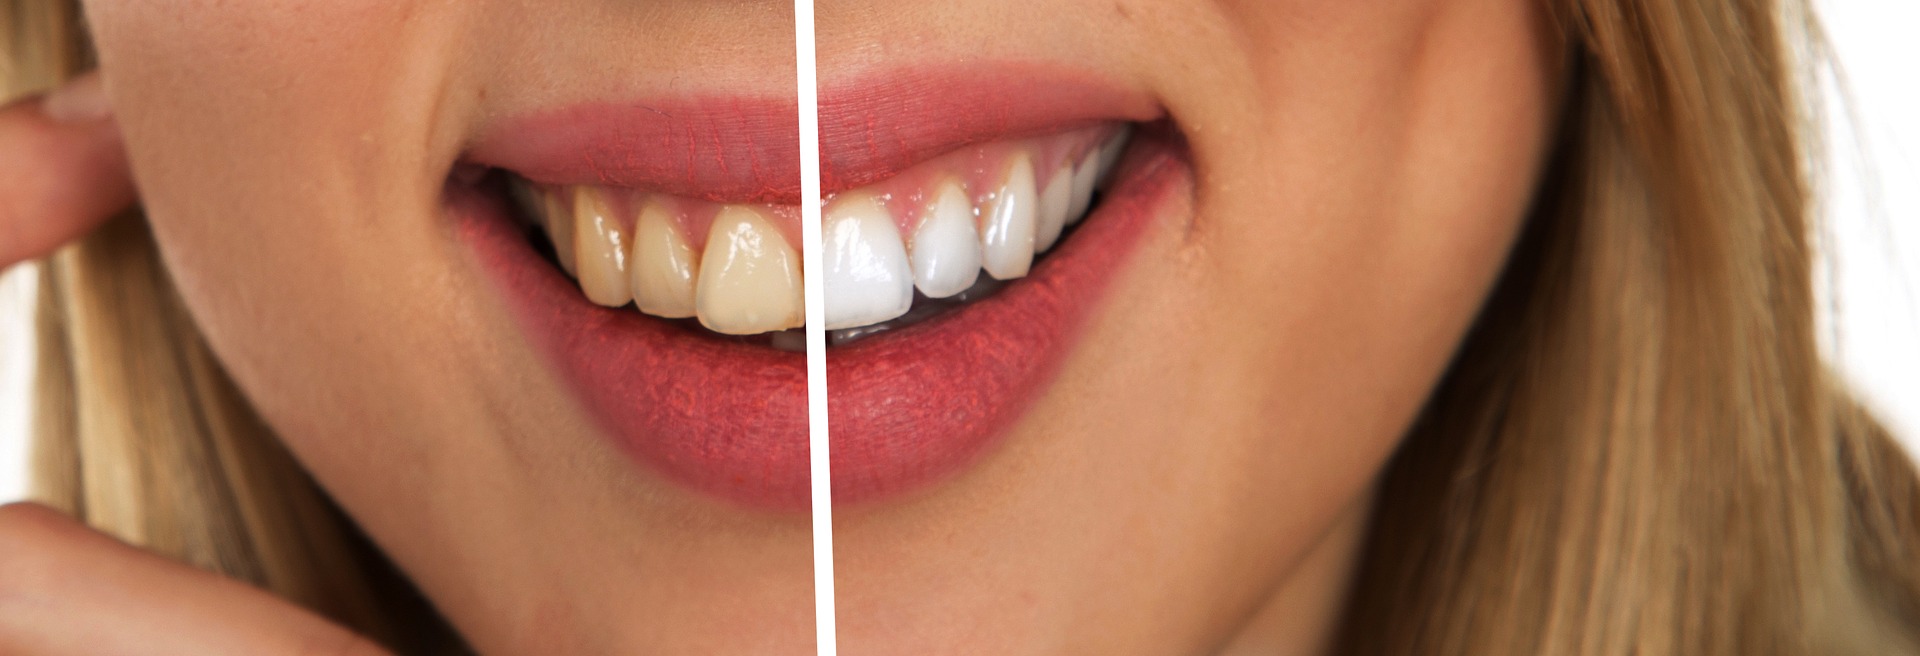 Women before and after teeth cleaning